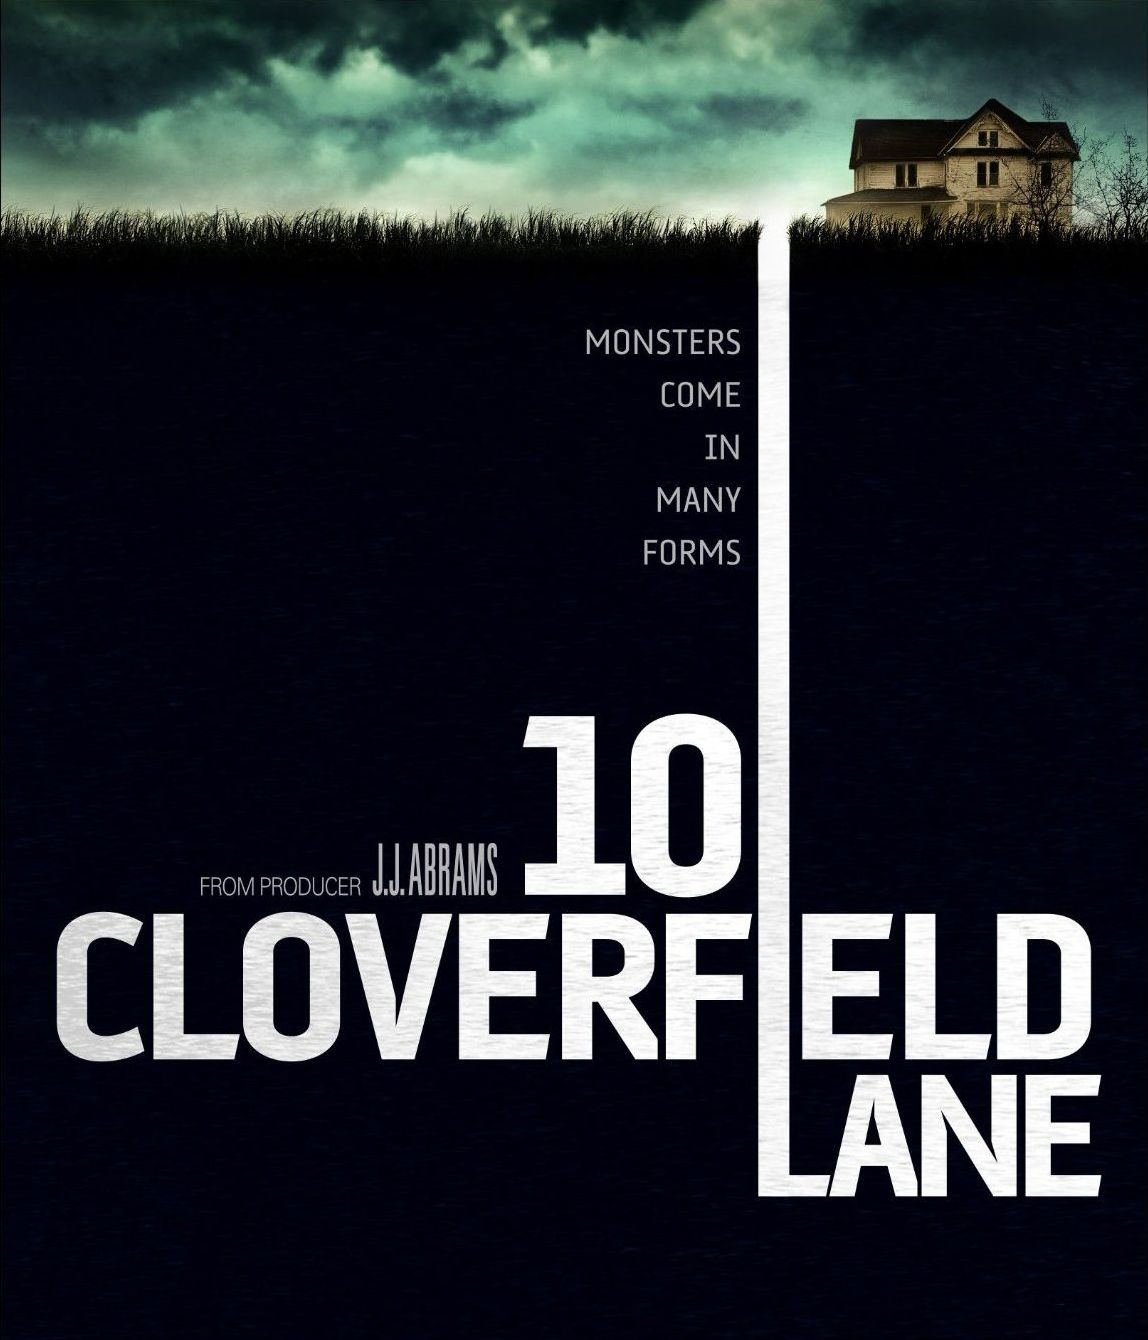 Monsters Come in Many Forms – 10 Cloverfield Lane (2016)